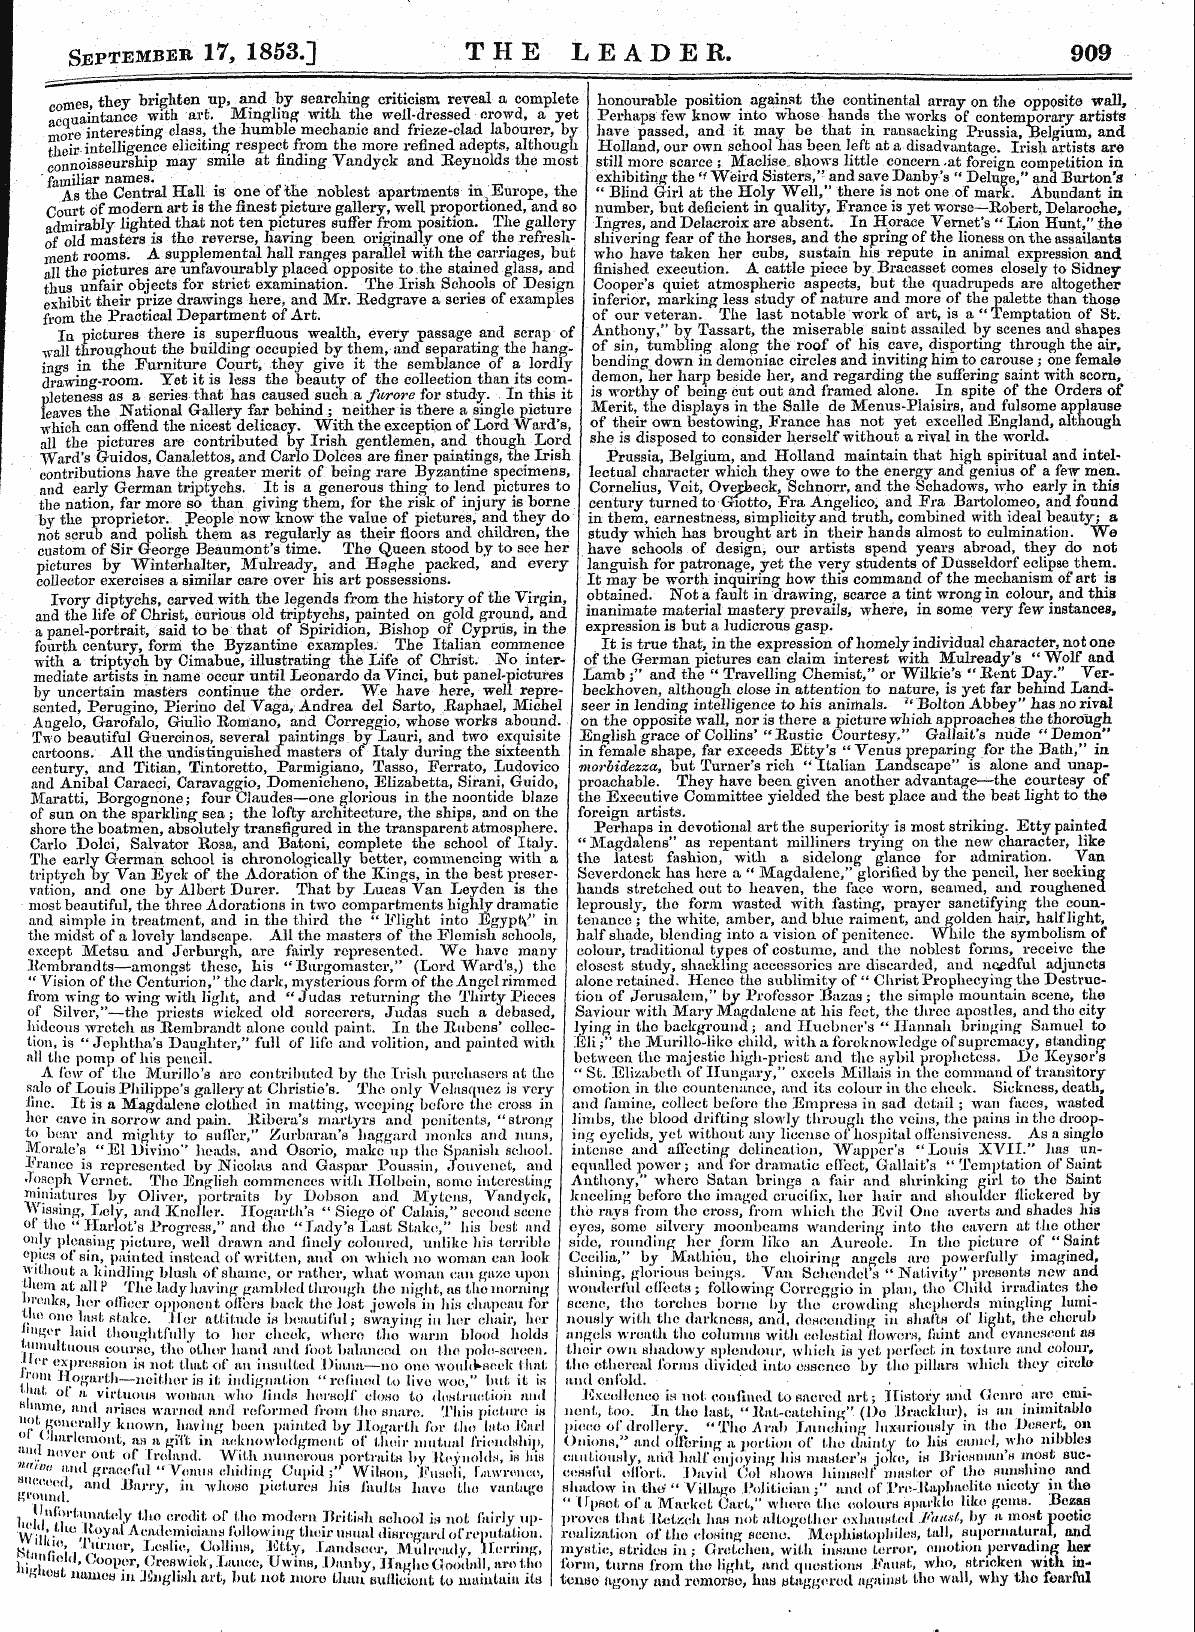 Leader (1850-1860): jS F Y, Country edition - September 17, 1853.] The Leader. 909